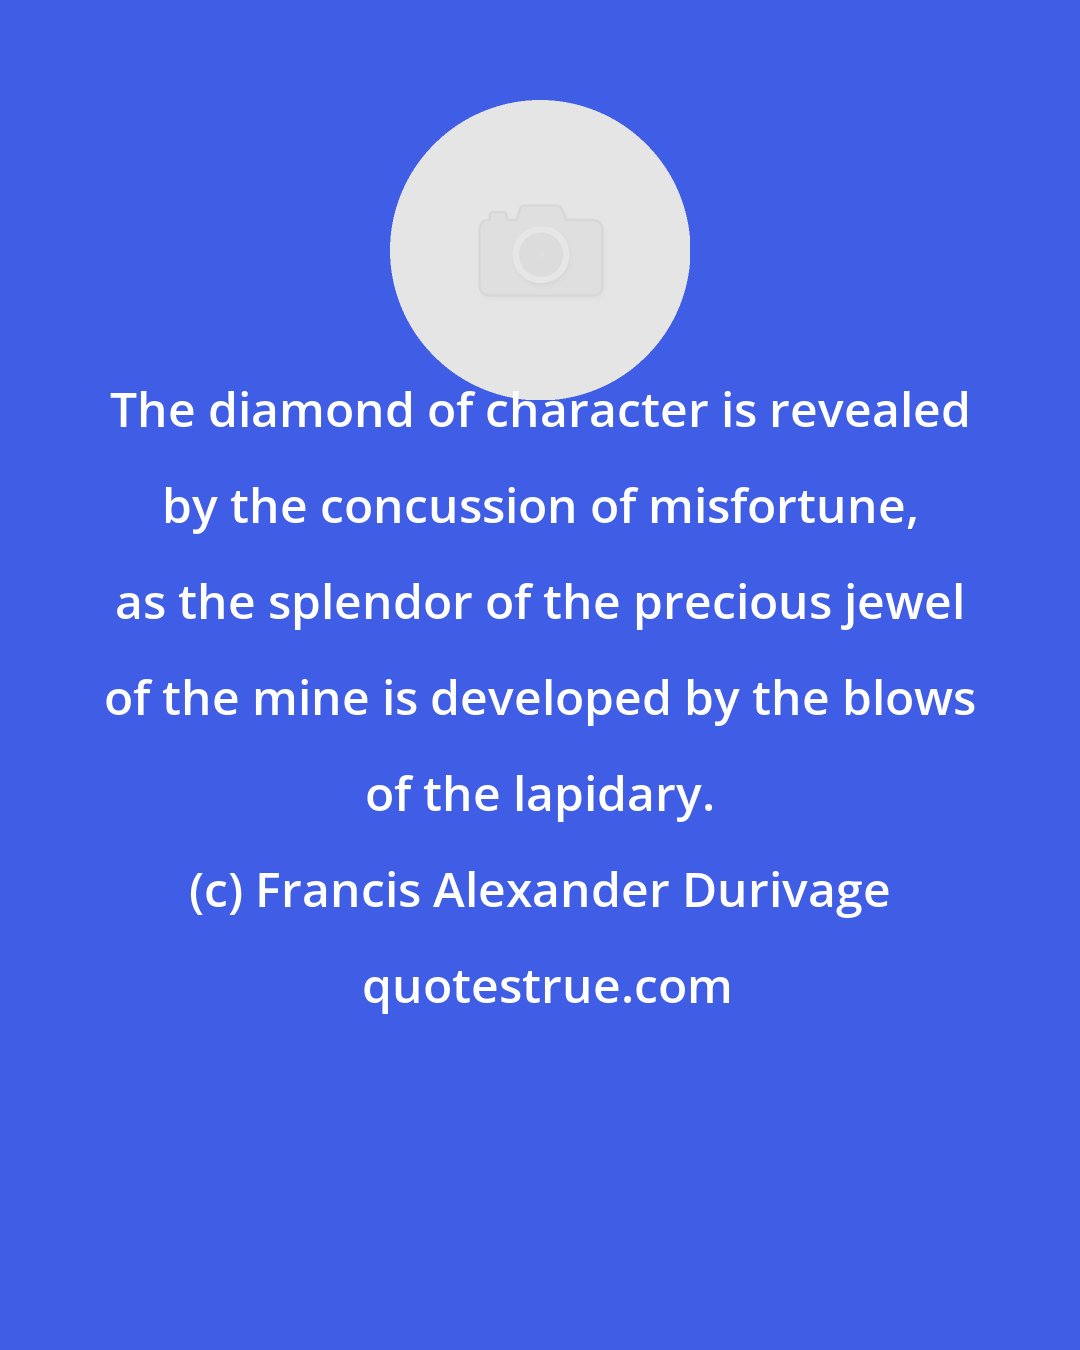 Francis Alexander Durivage: The diamond of character is revealed by the concussion of misfortune, as the splendor of the precious jewel of the mine is developed by the blows of the lapidary.